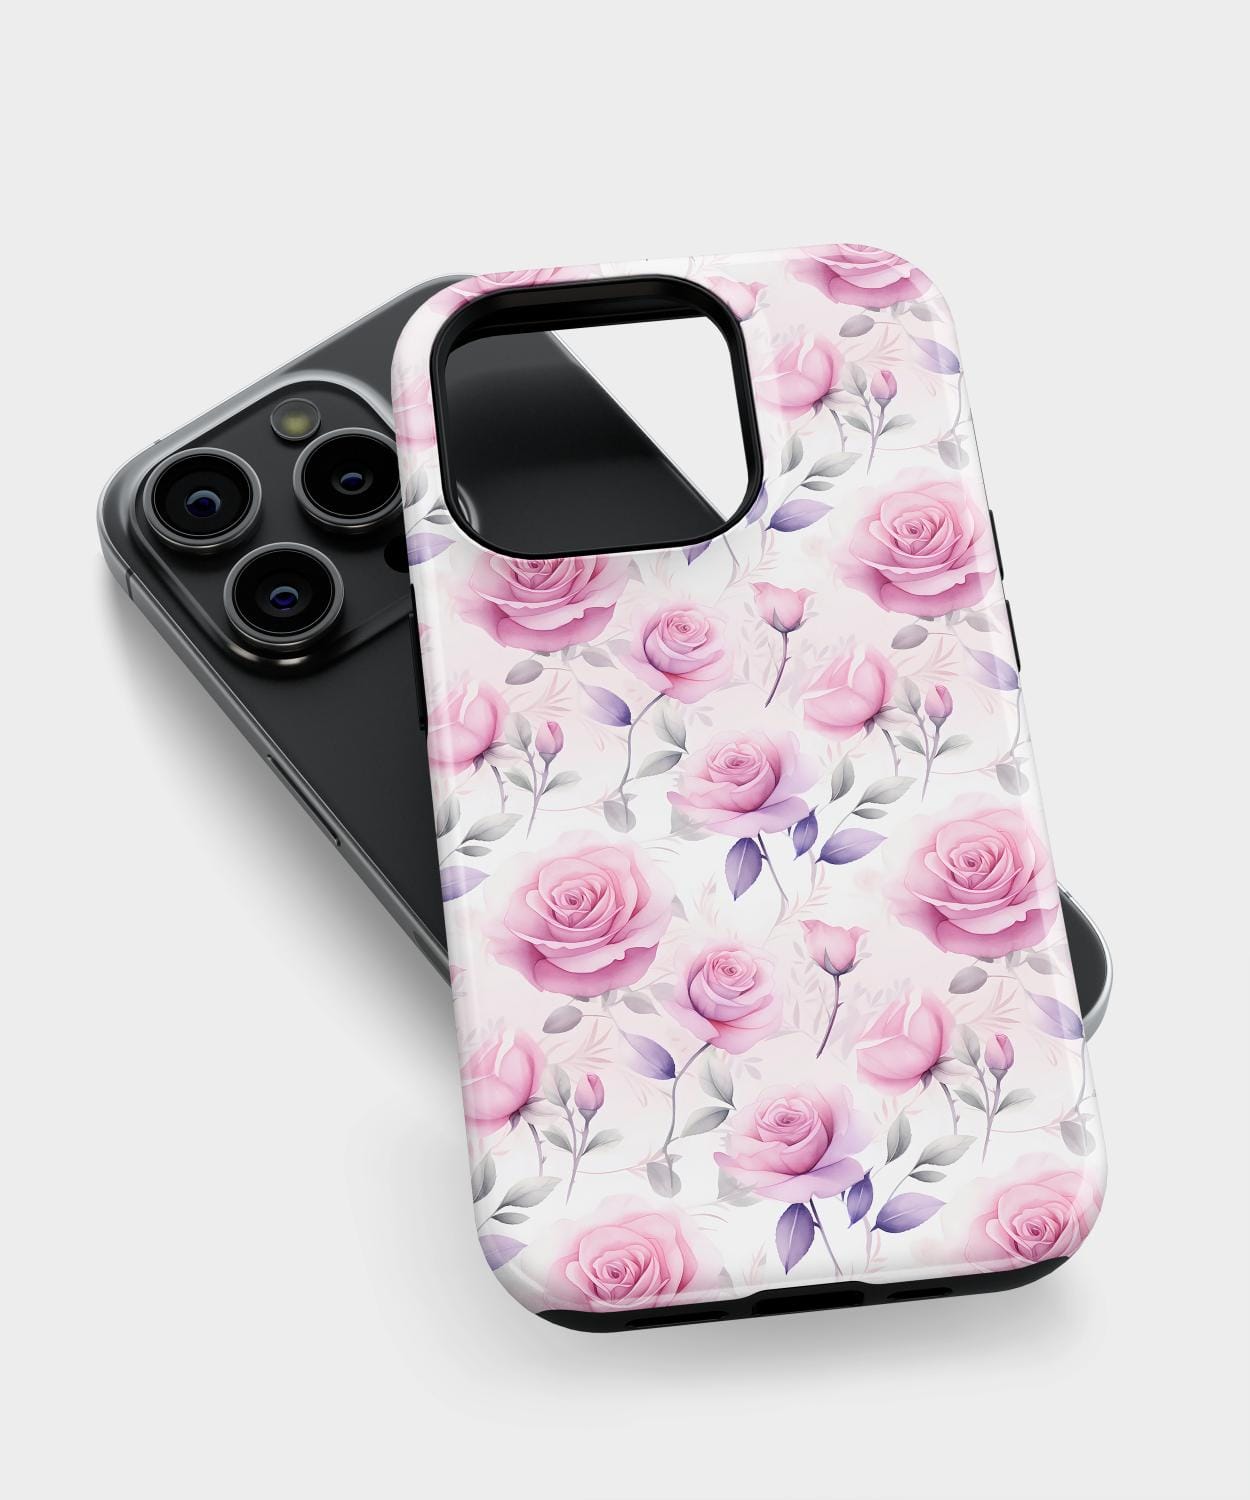 Lovely Rose iPhone Case